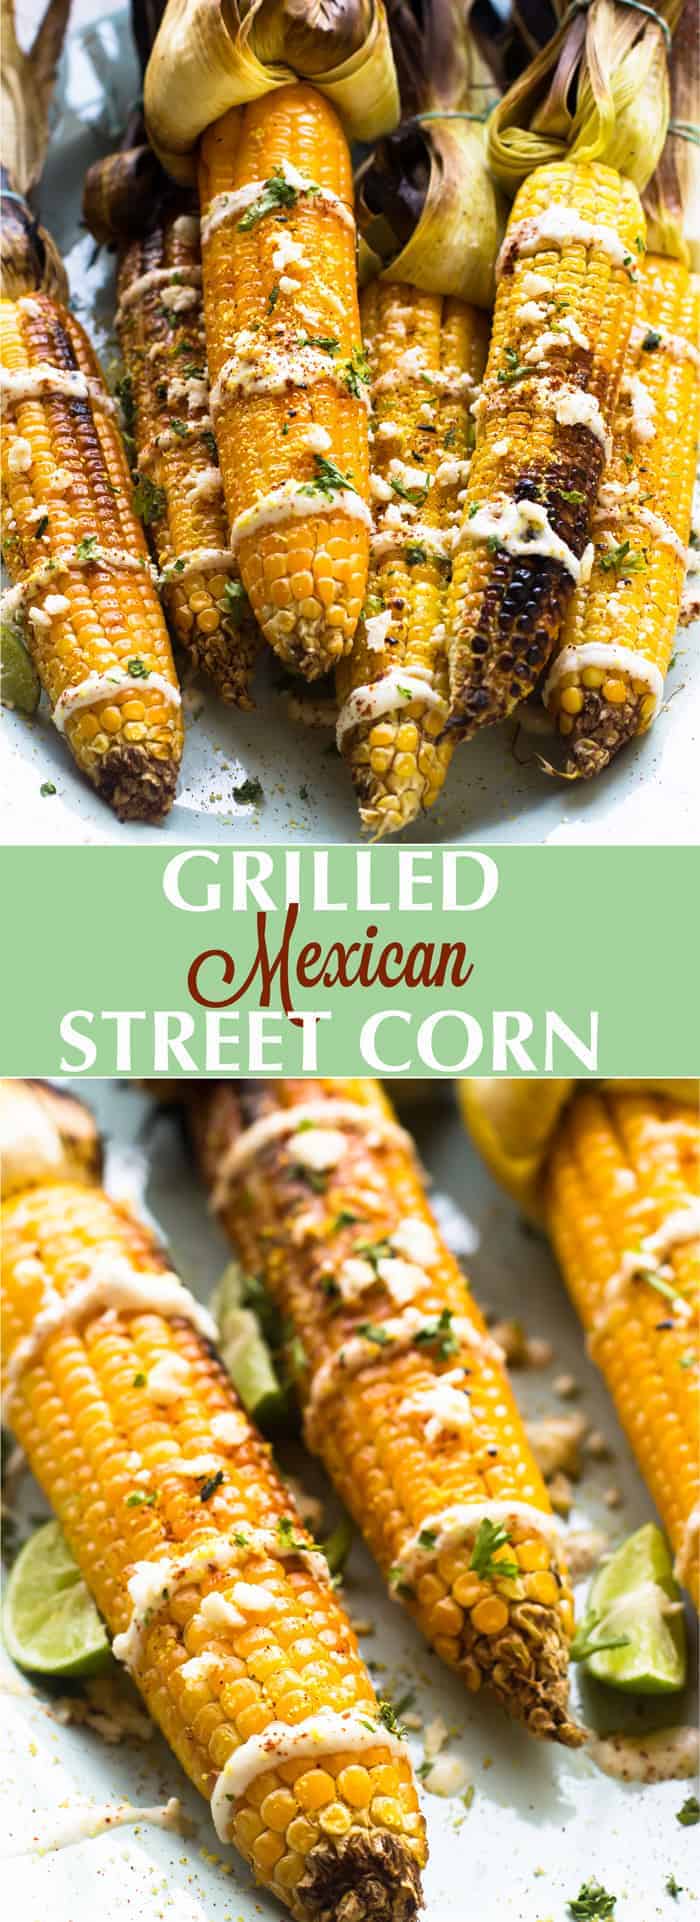 This Grilled Mexican Street Corn is grilled to smoky perfection then smothered in a delicous and creamy Lime Crema. It's the best side dish!